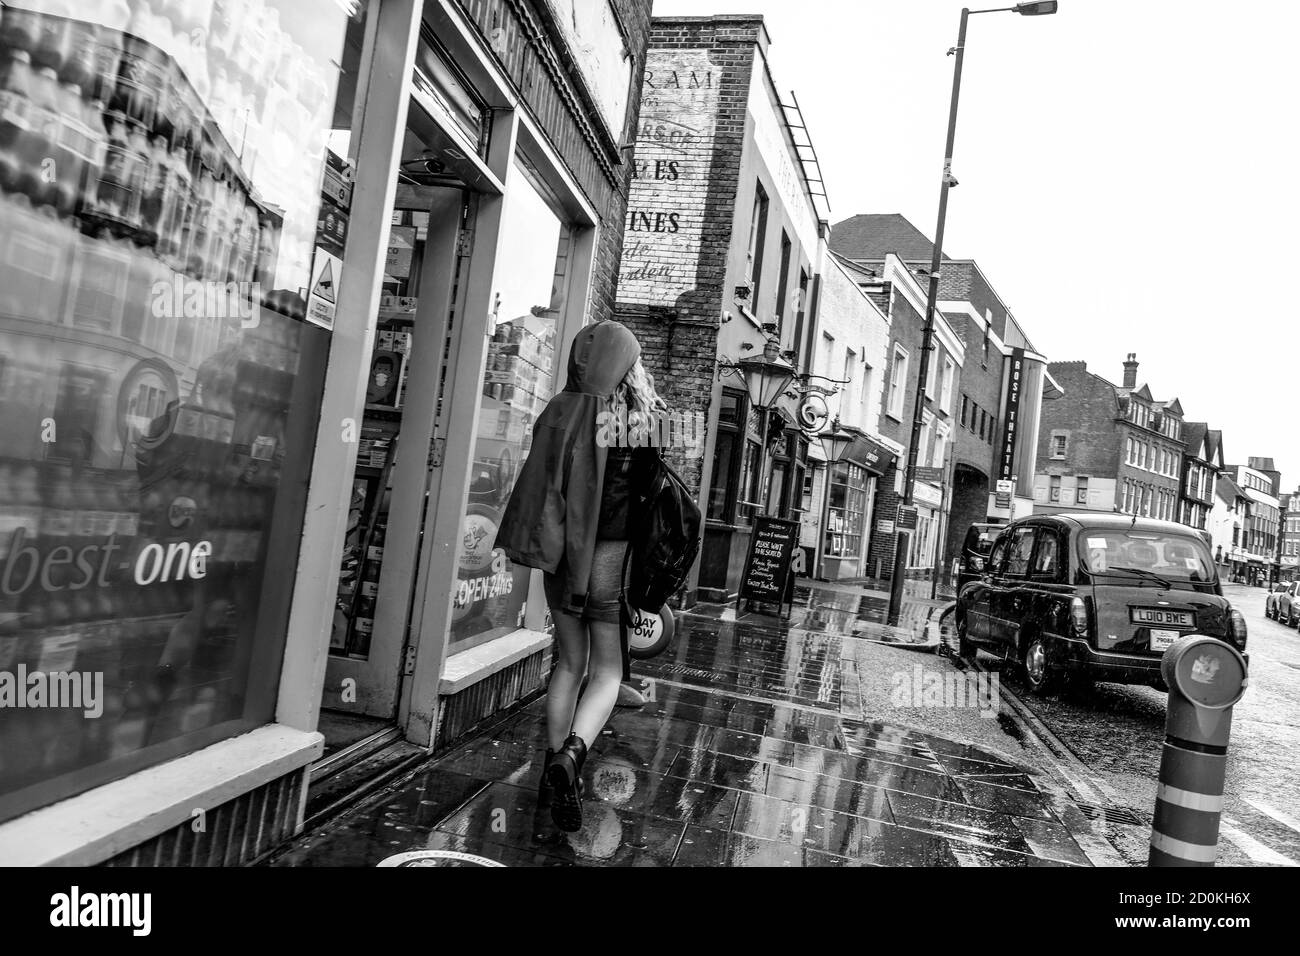 Young Woman Wearing A Short Skirt And Boots Walking In The Rain In Black And White Stock Photo